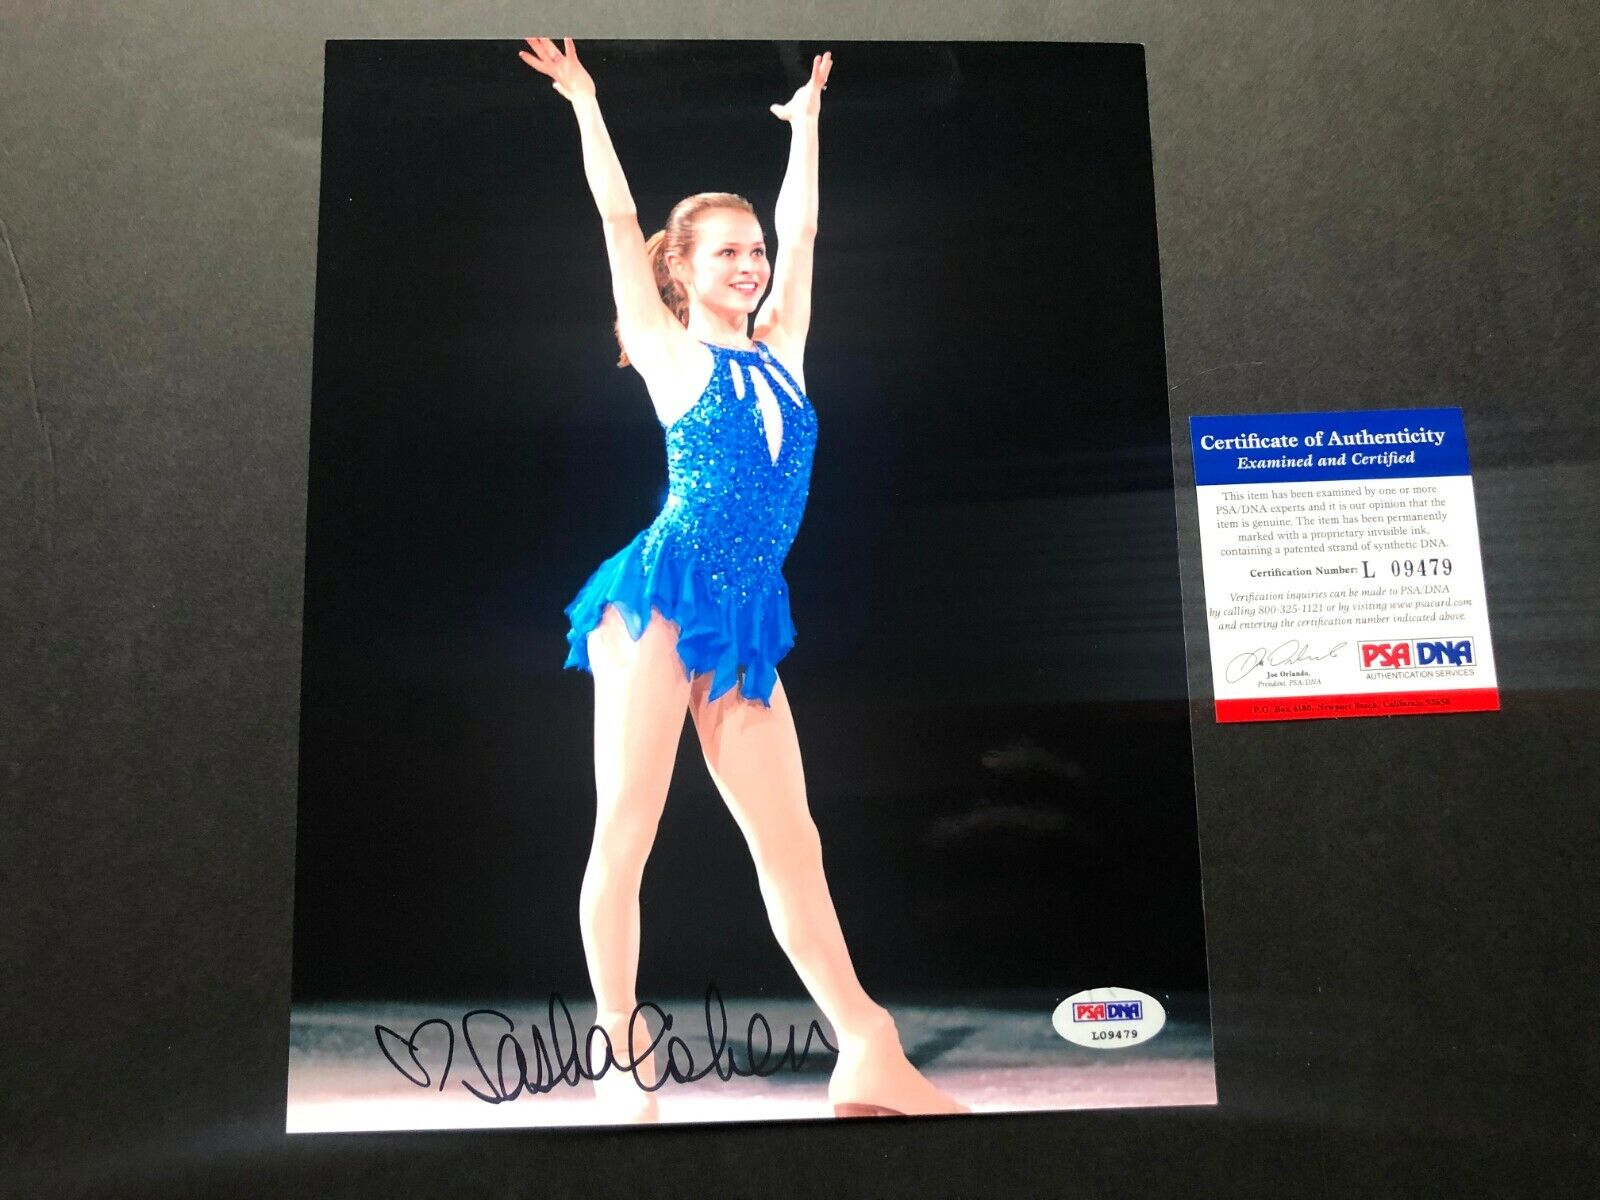 Sasha Cohen Rare! signed autographed Olympic skating 8x10 Photo Poster painting PSA/DNA coa cert